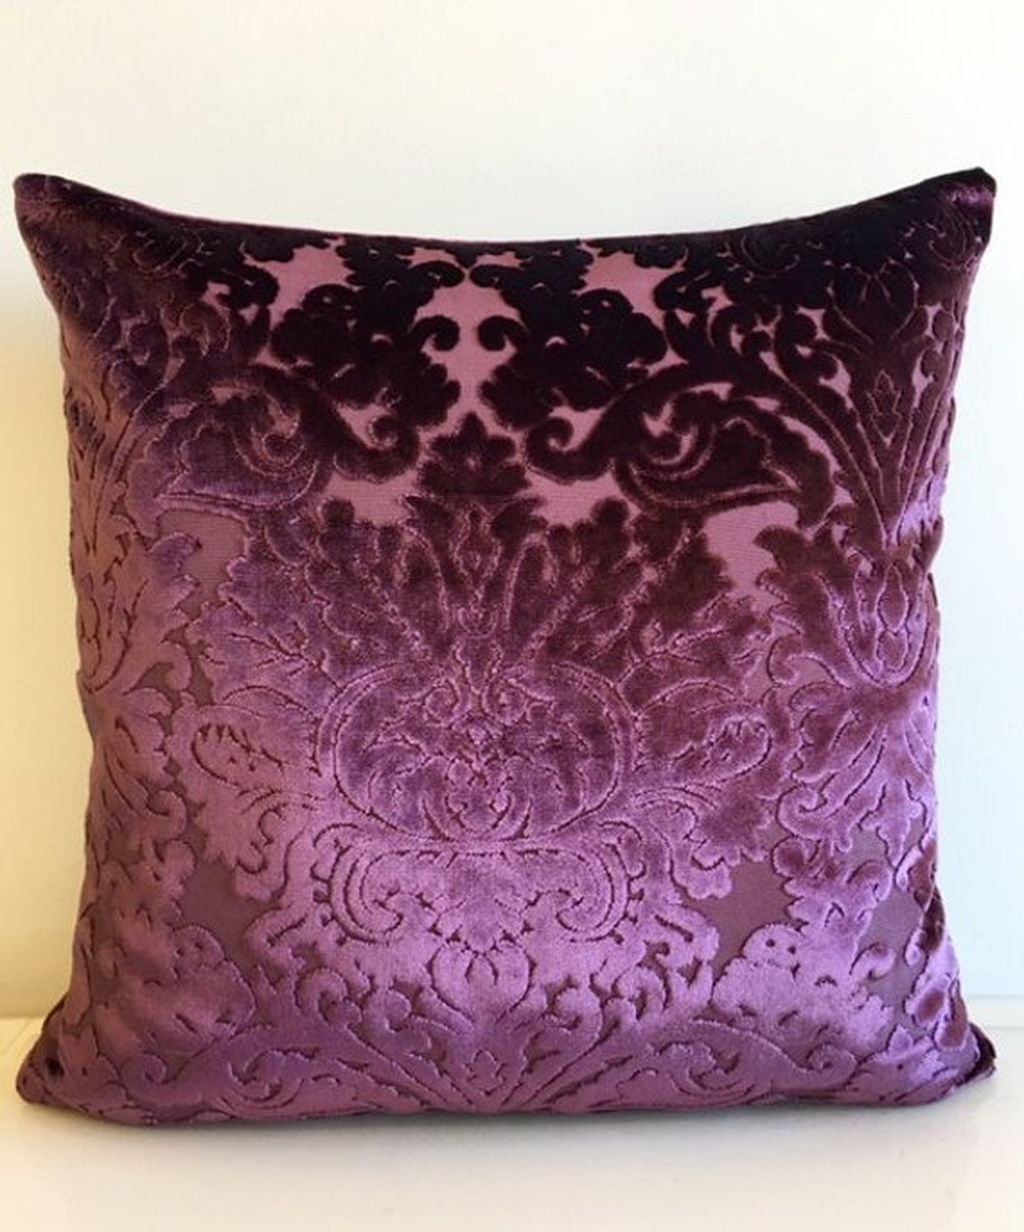 Charming Pillow Decorative Ideas To Apply Asap 18